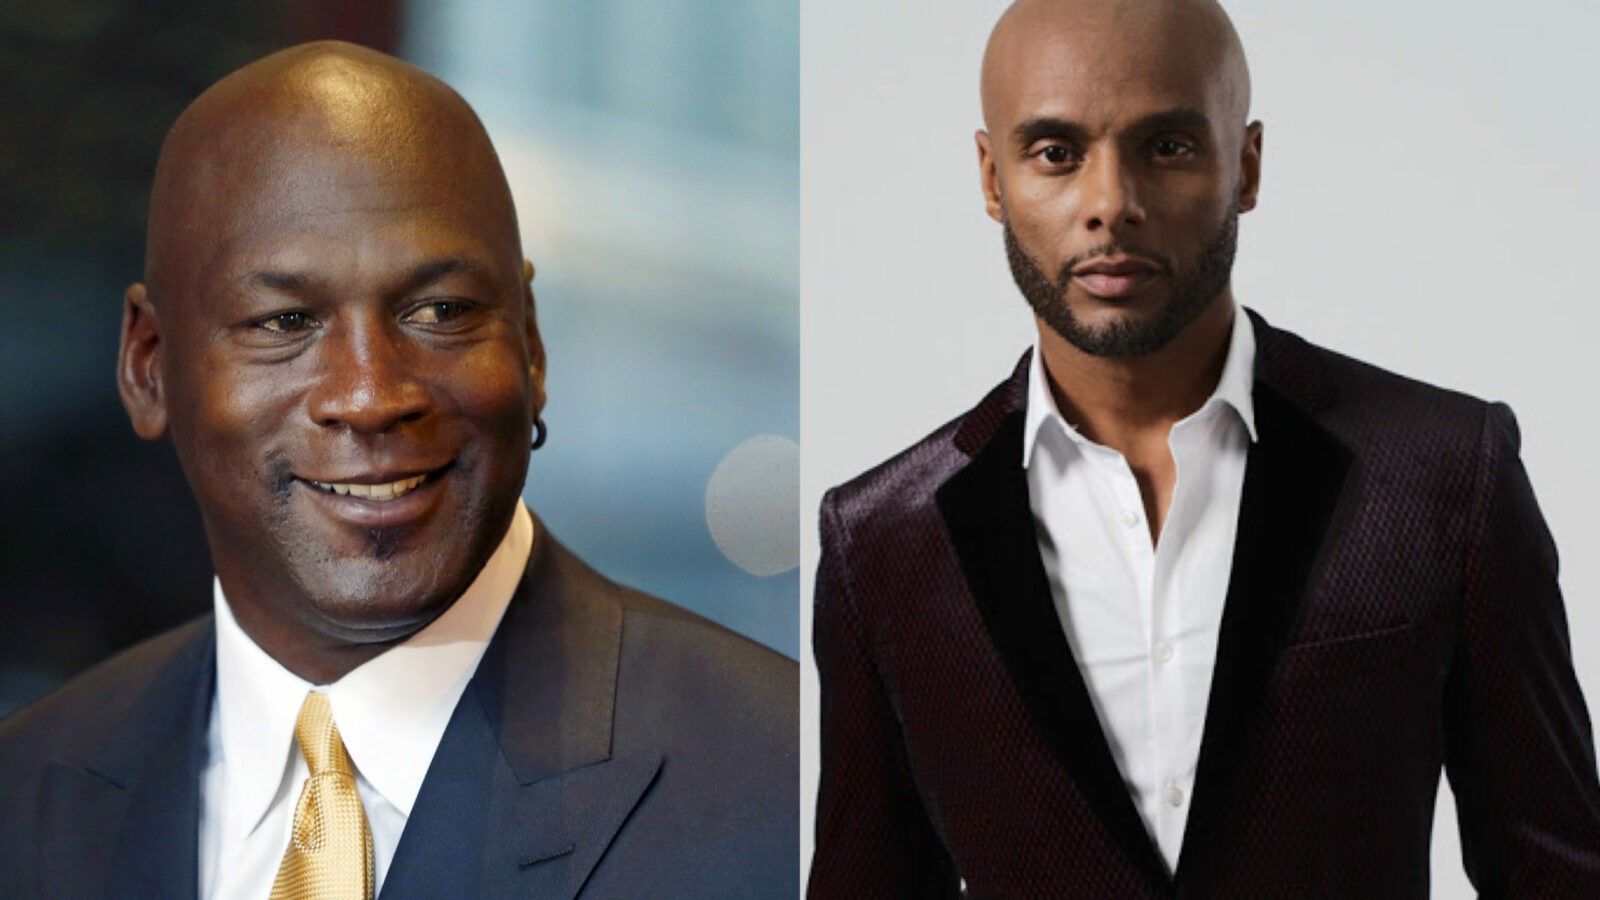  Michael Jordan Hilariously Gets His Life To Kenny Lattimore’s Bop Before His Big Game, Twitter Goes Off